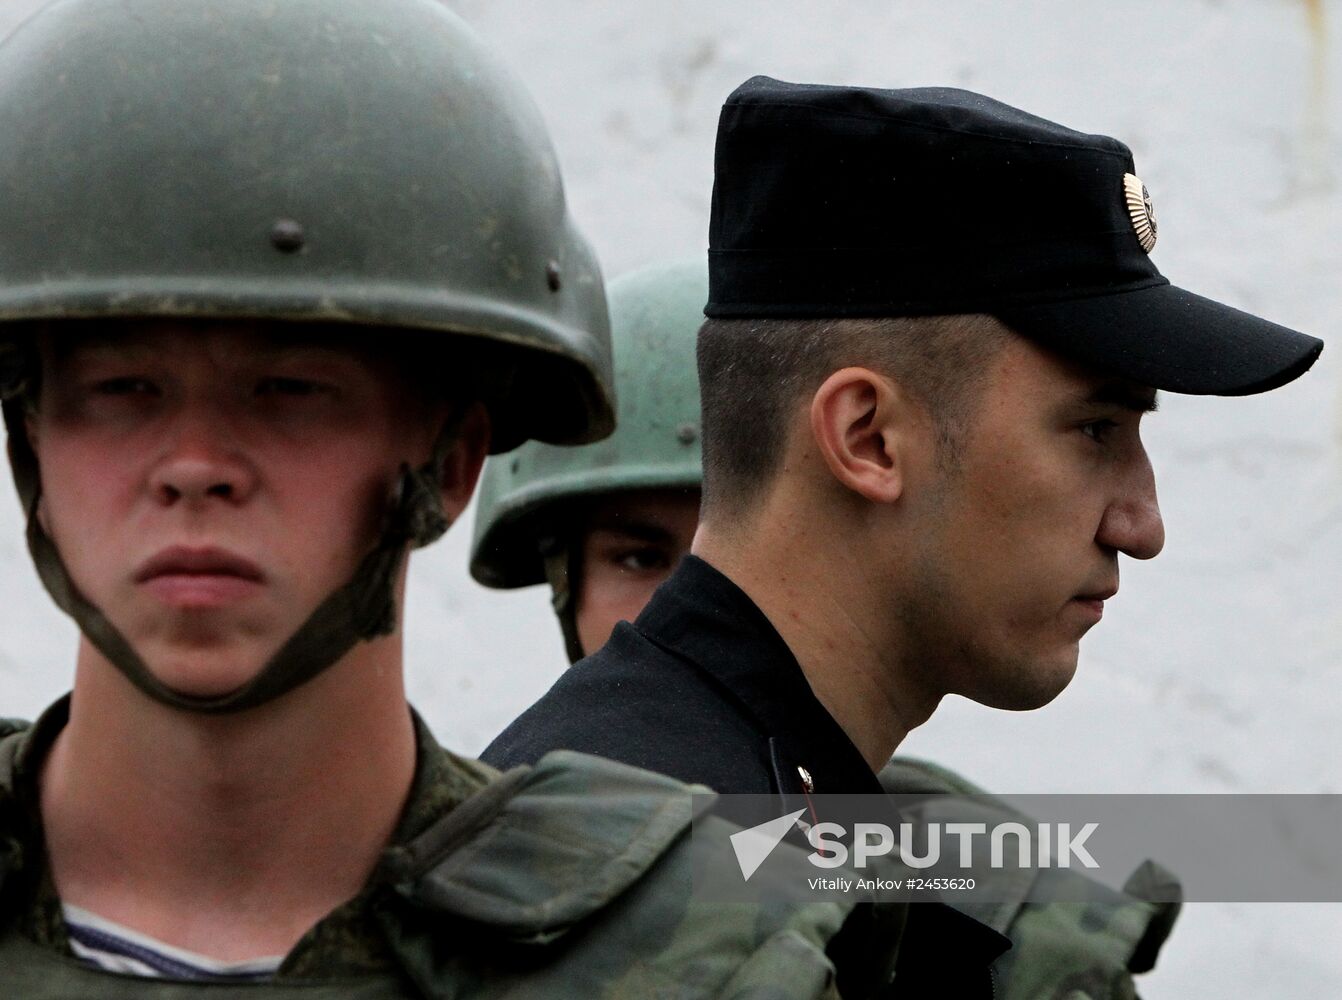 The military police force of the Vladivostok Garrison